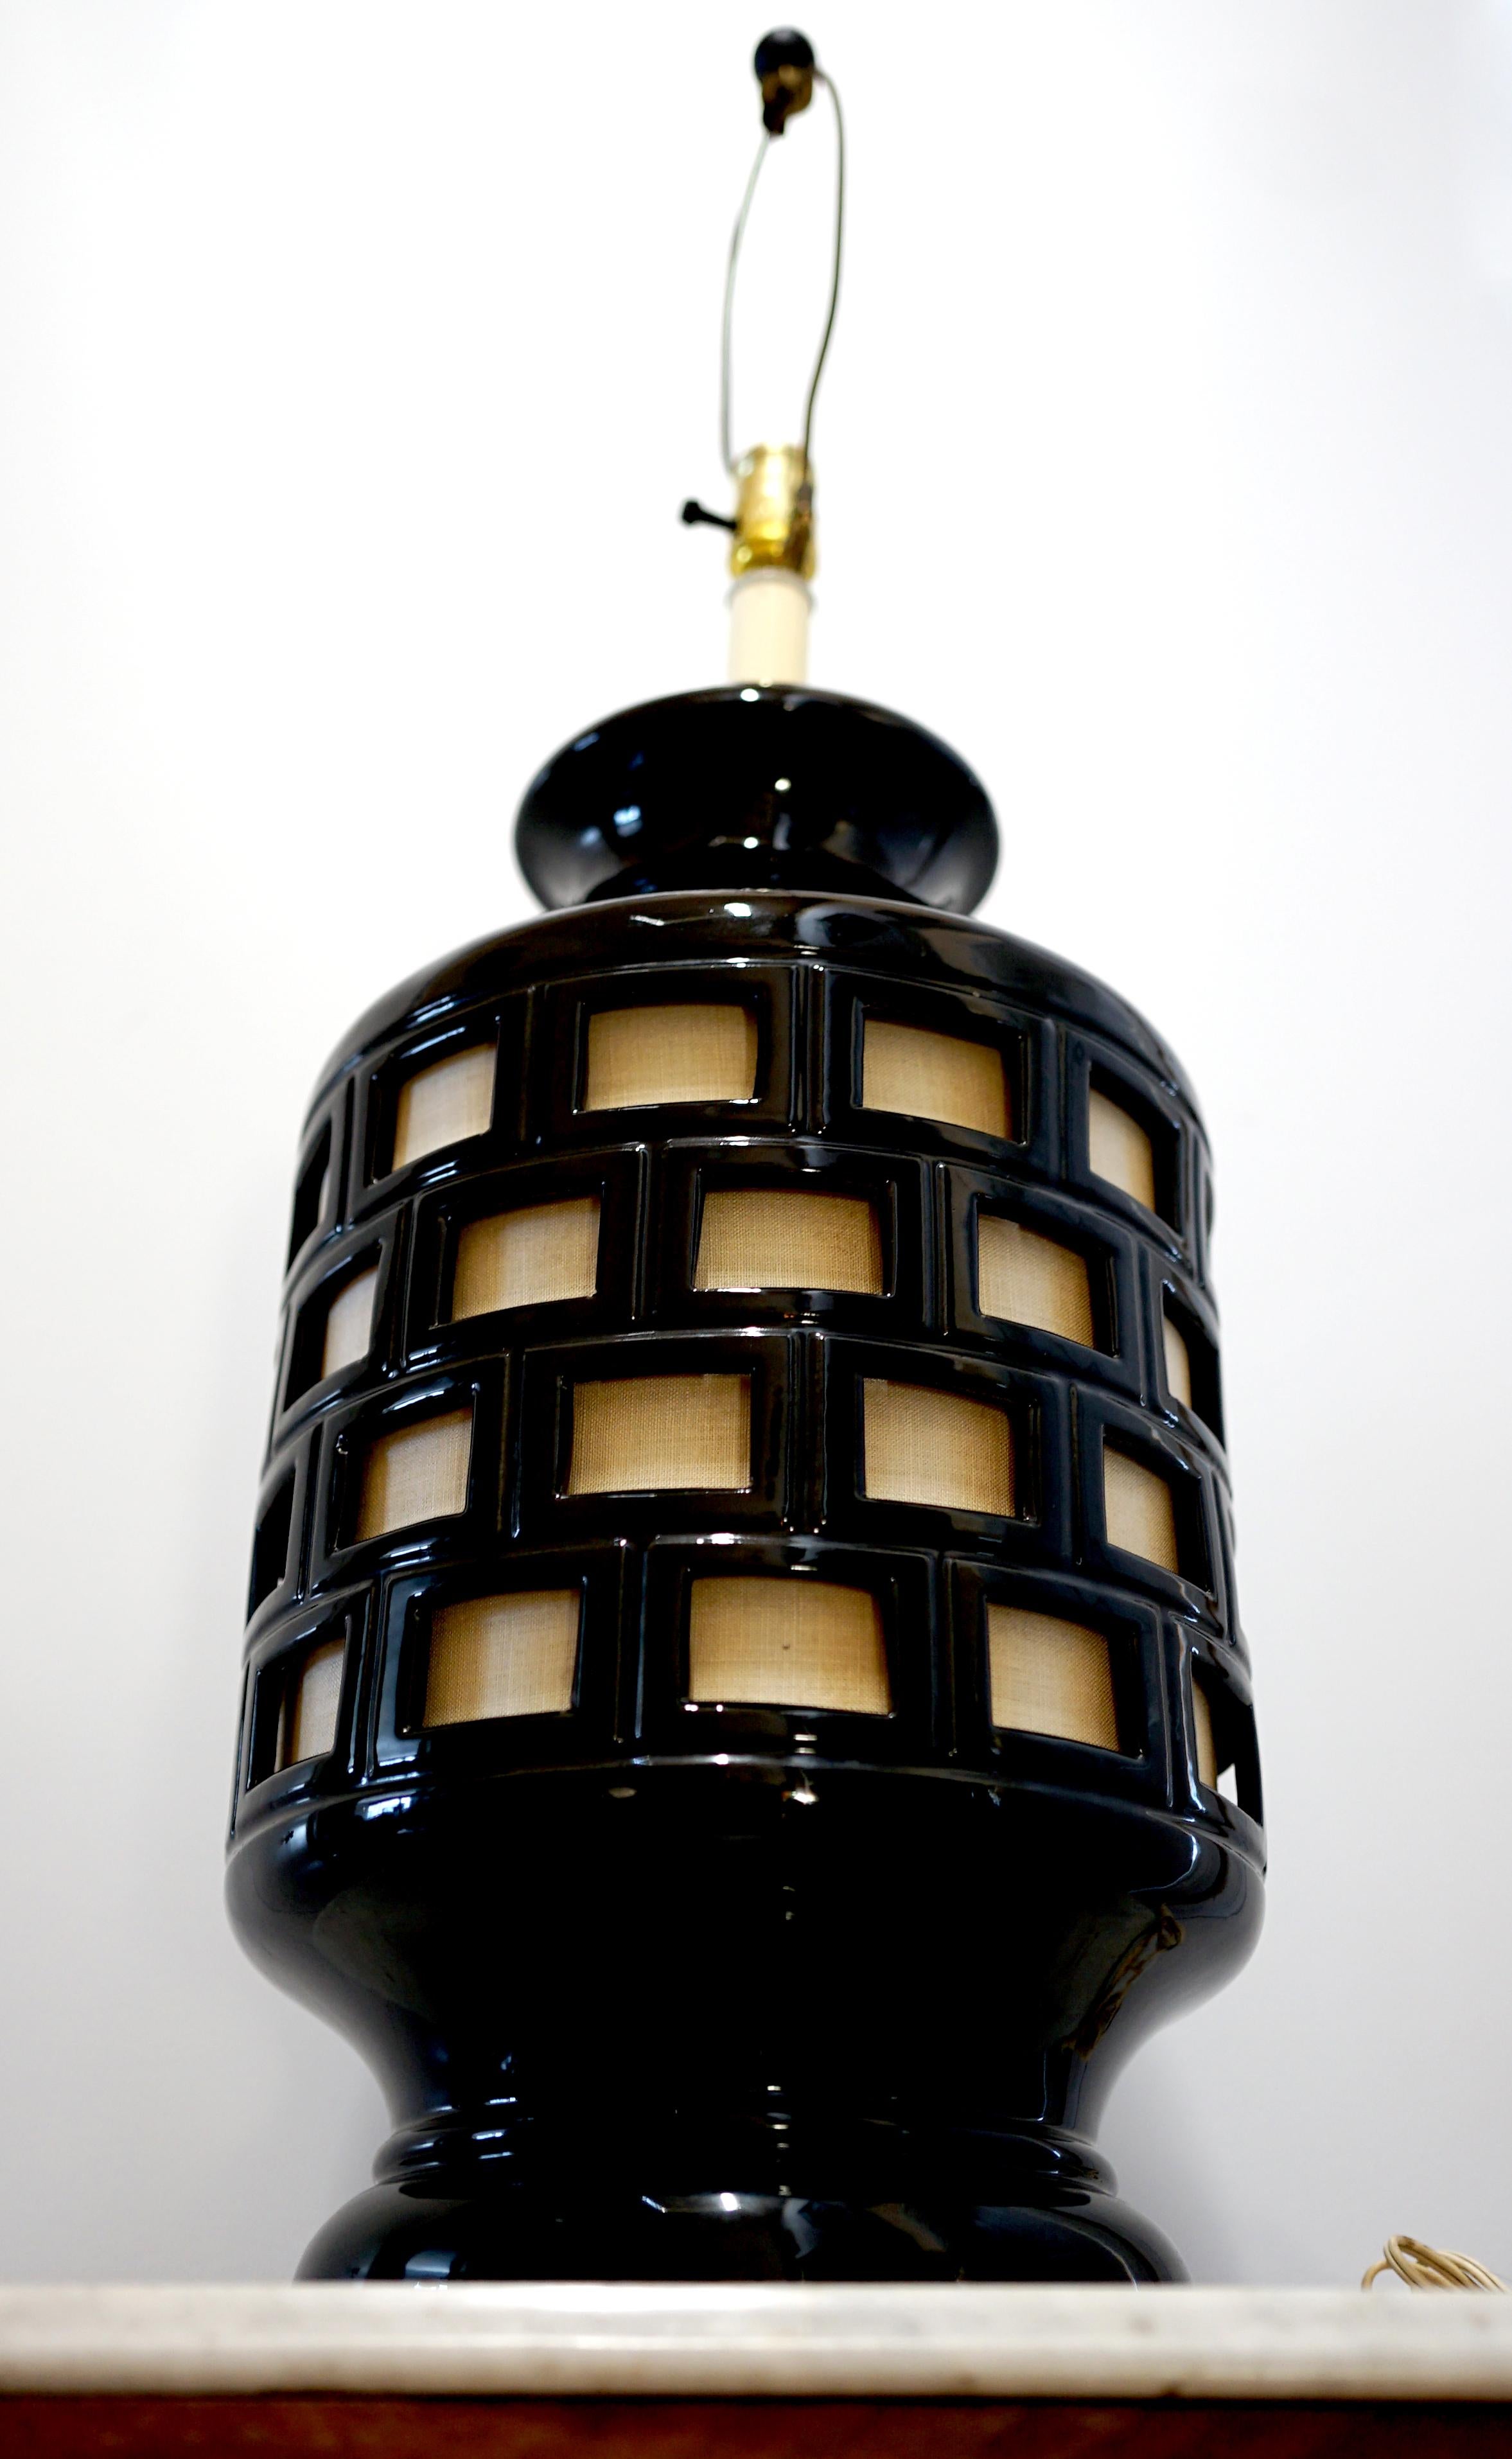 The geometric feel and sheer size of this vintage black overlaid pottery and fabric table lamp is impressive. It is the epitome of statement lighting and will become an immediate design asset in many settings. Features like the shape and high glaze